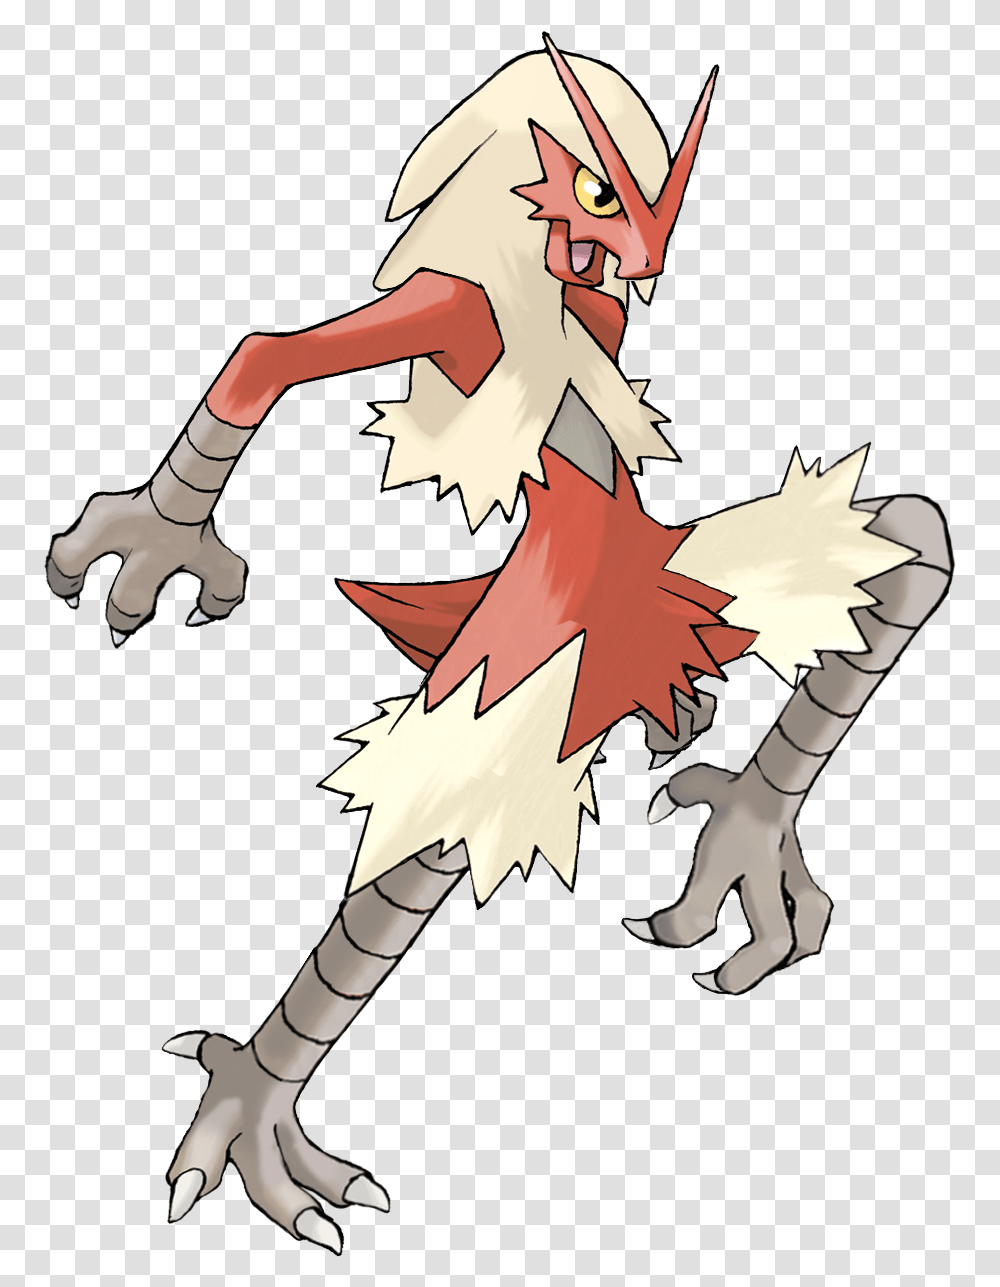 Vp Pokmon Searching For Posts With The Image Hash Pokemon Blaziken, Person, Human, Weapon, Weaponry Transparent Png